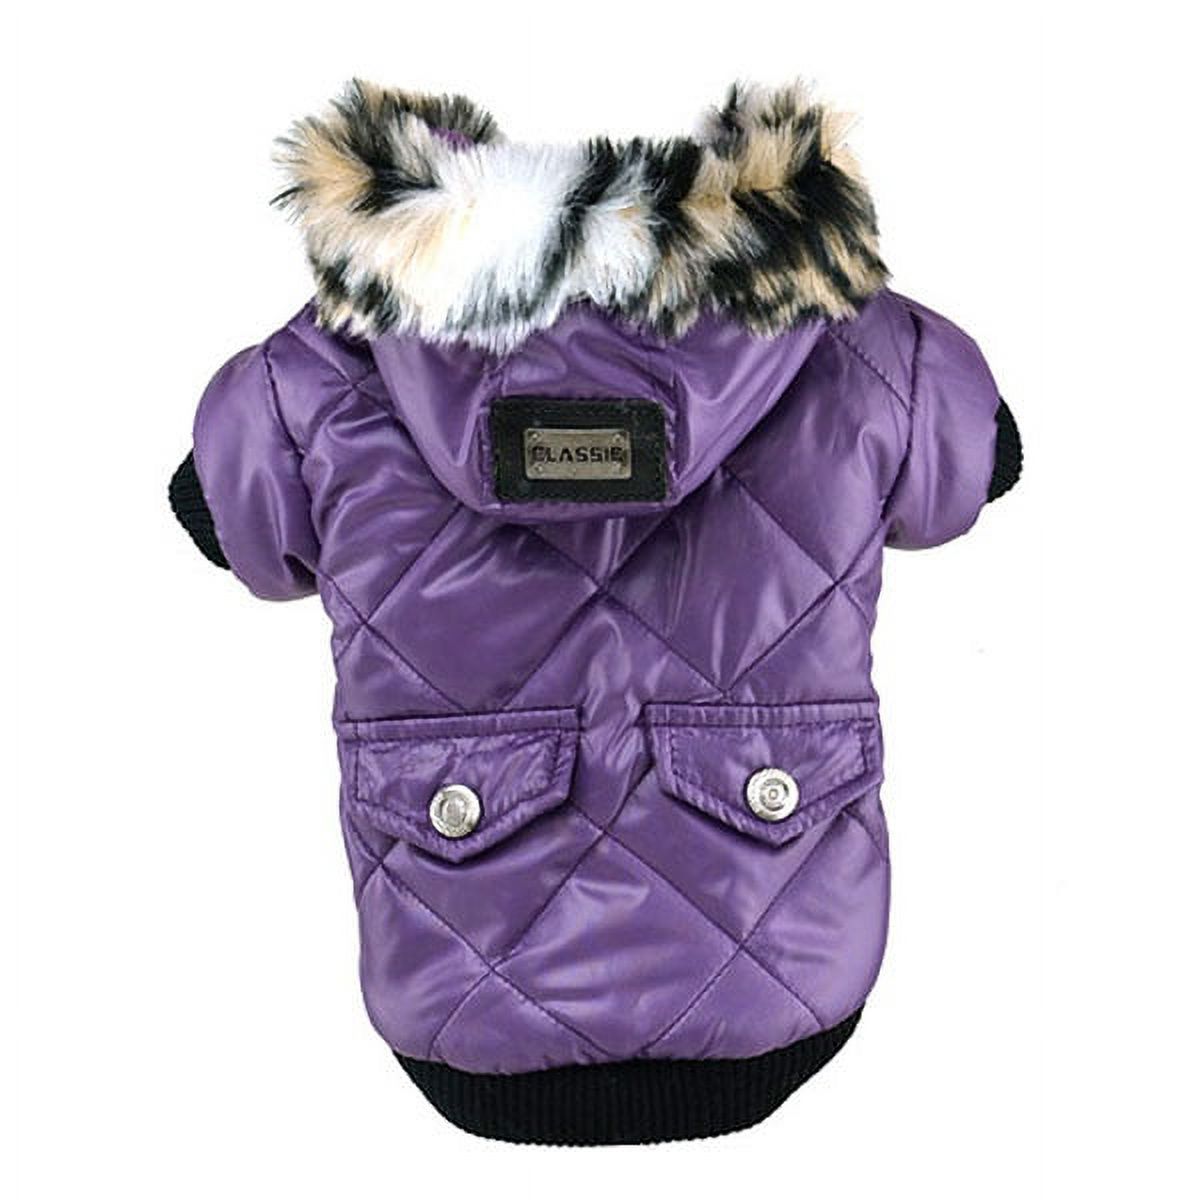 Small Pet Puppy Warm Winter Sweater Hoodie Clothes Doggy Cat Waterproof Thick Coat for Small Breed Dog Like Chihuahua - image 5 of 8